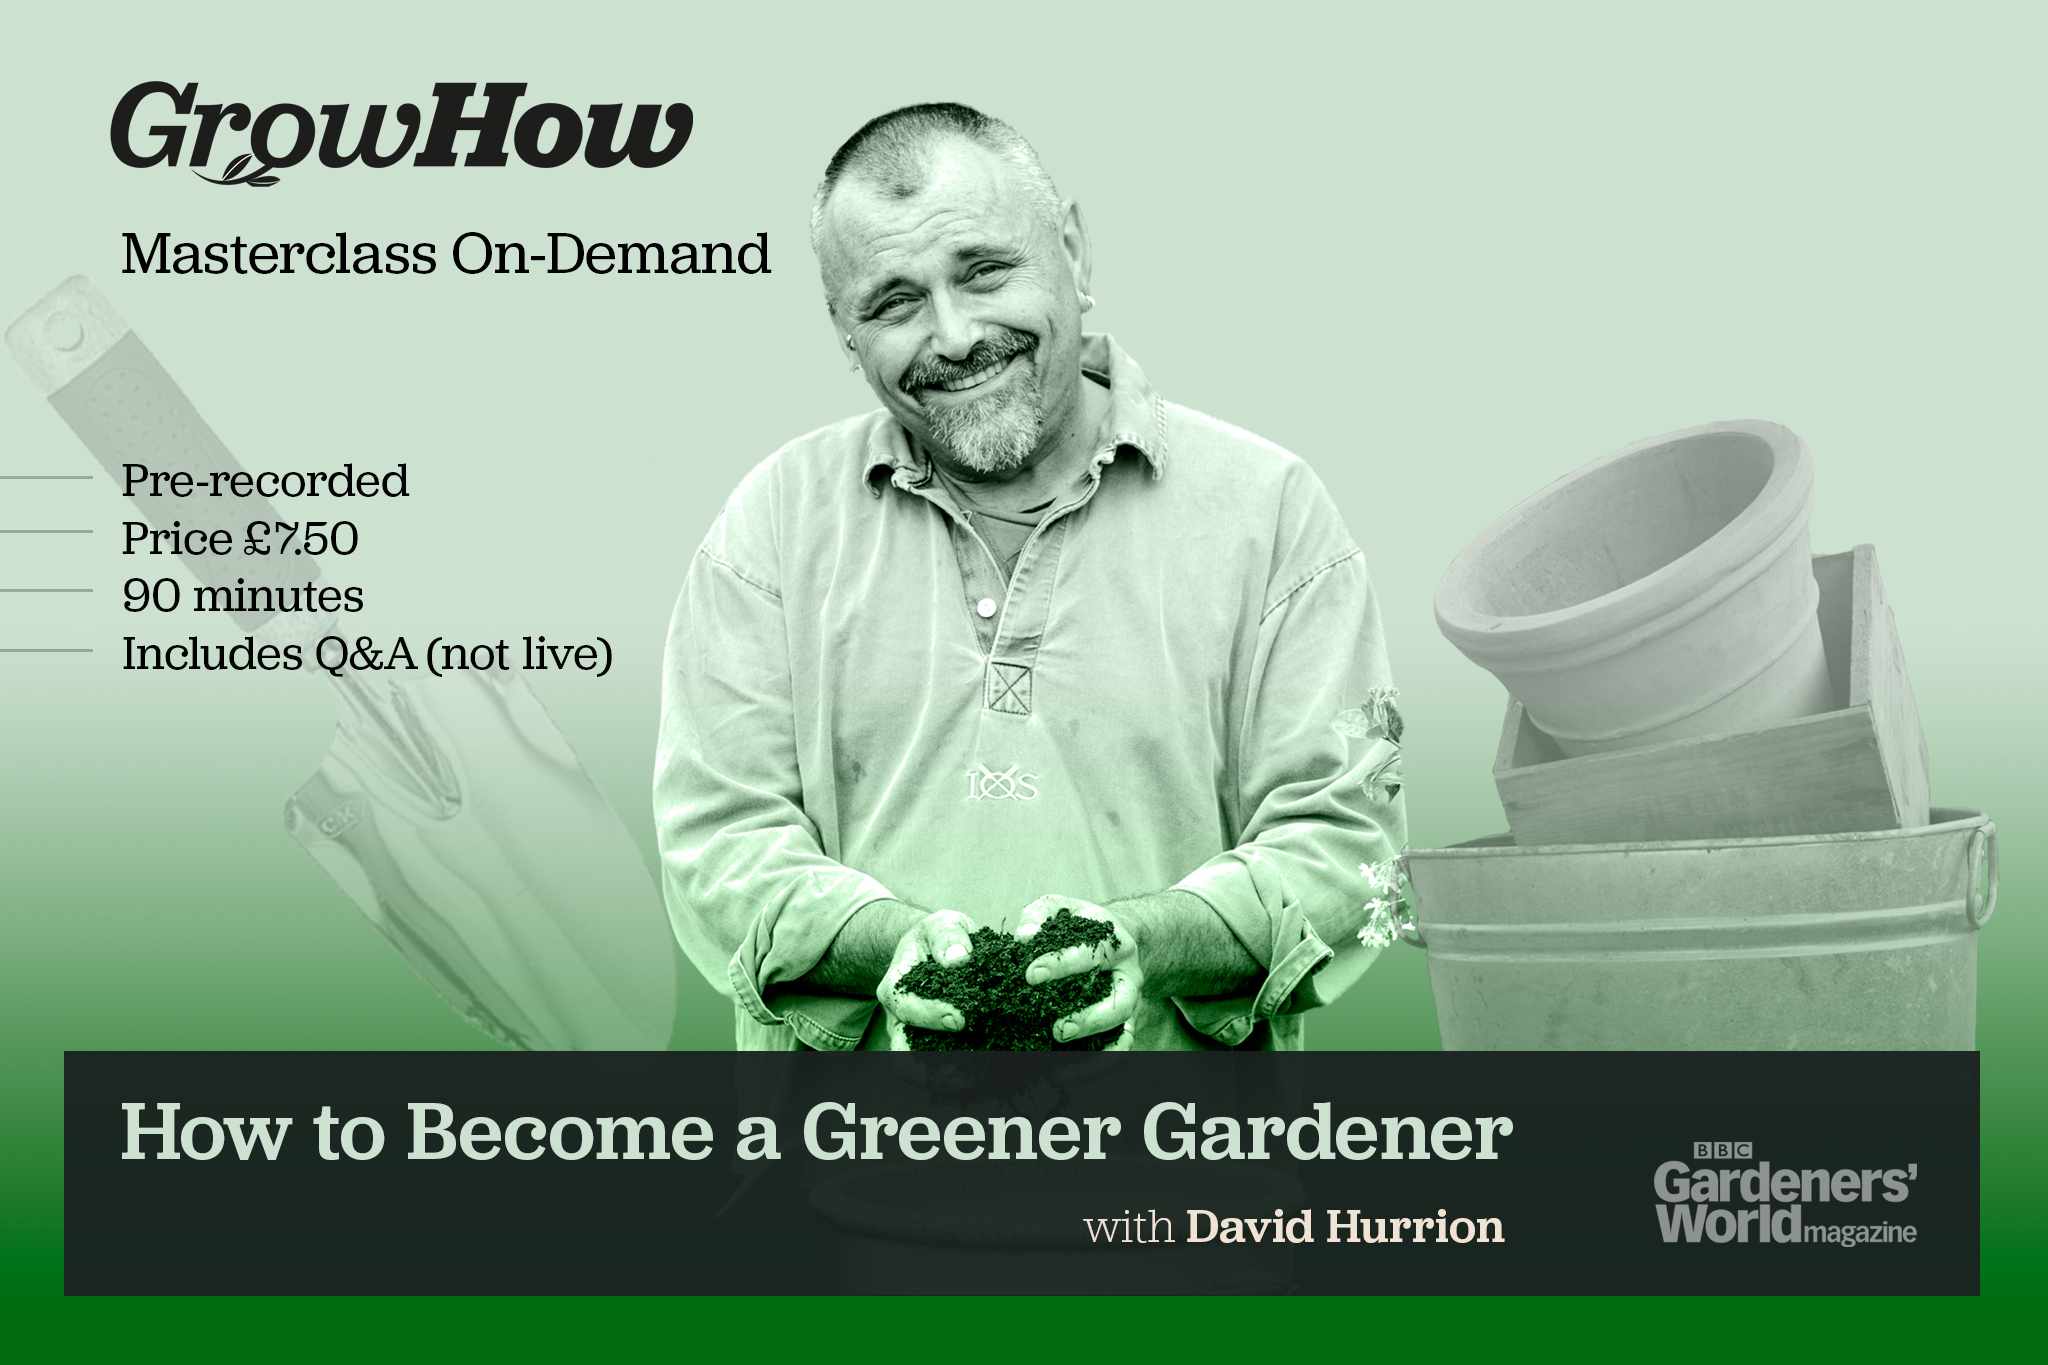 Masterclass On-Demand: How to Become a Greener Gardener